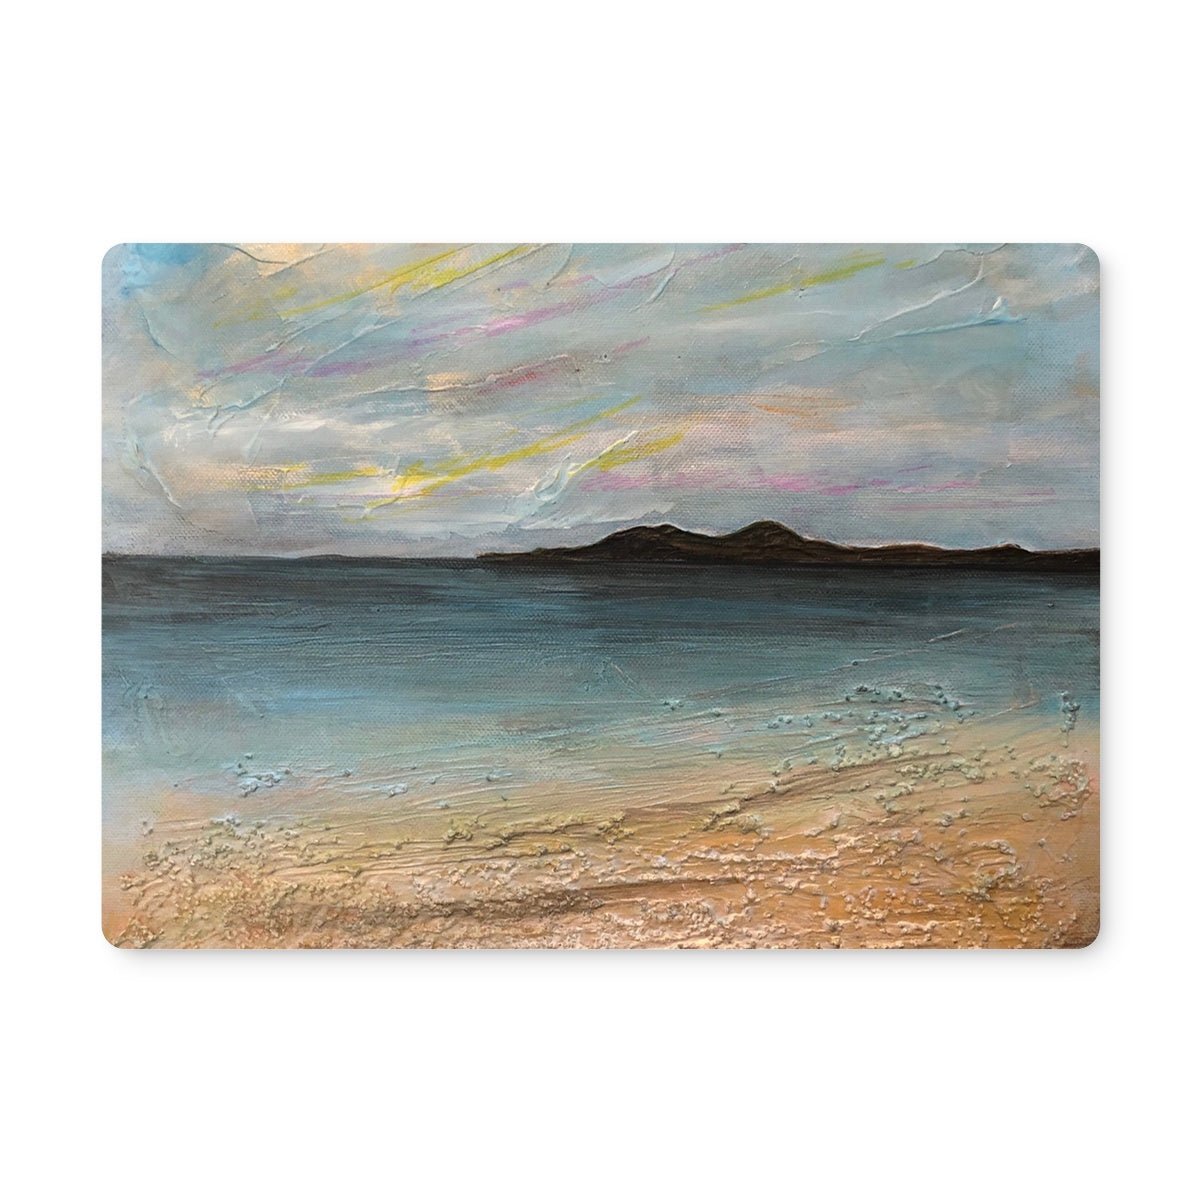 Garrynamonie Beach South Uist Art Gifts Placemat-Placemats-Hebridean Islands Art Gallery-Single Placemat-Paintings, Prints, Homeware, Art Gifts From Scotland By Scottish Artist Kevin Hunter